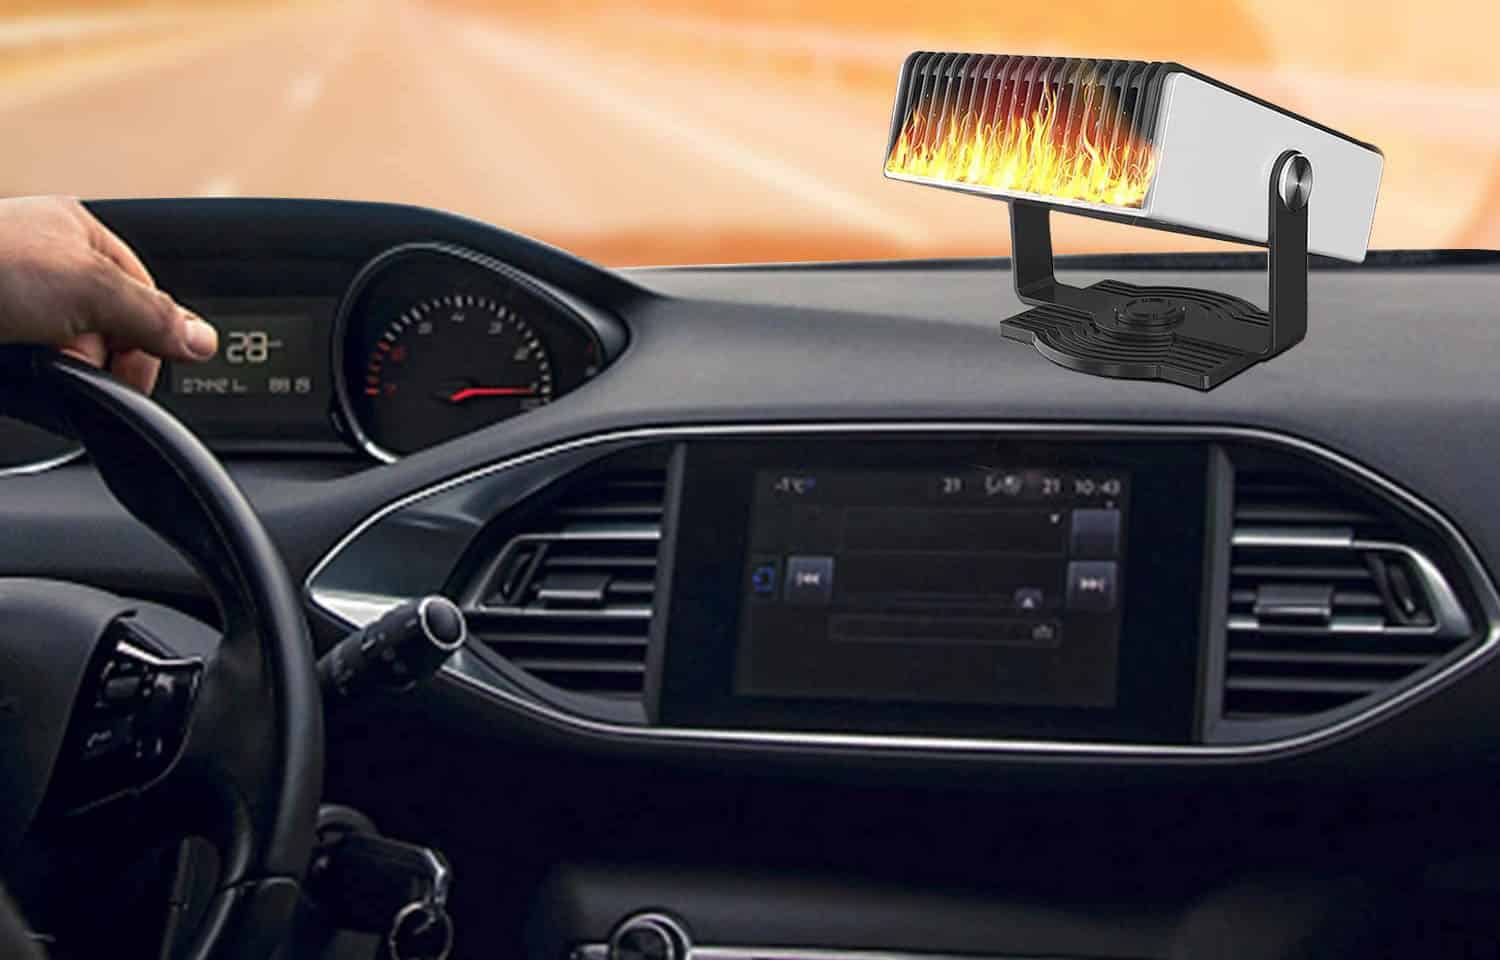 Portable Heaters for Car